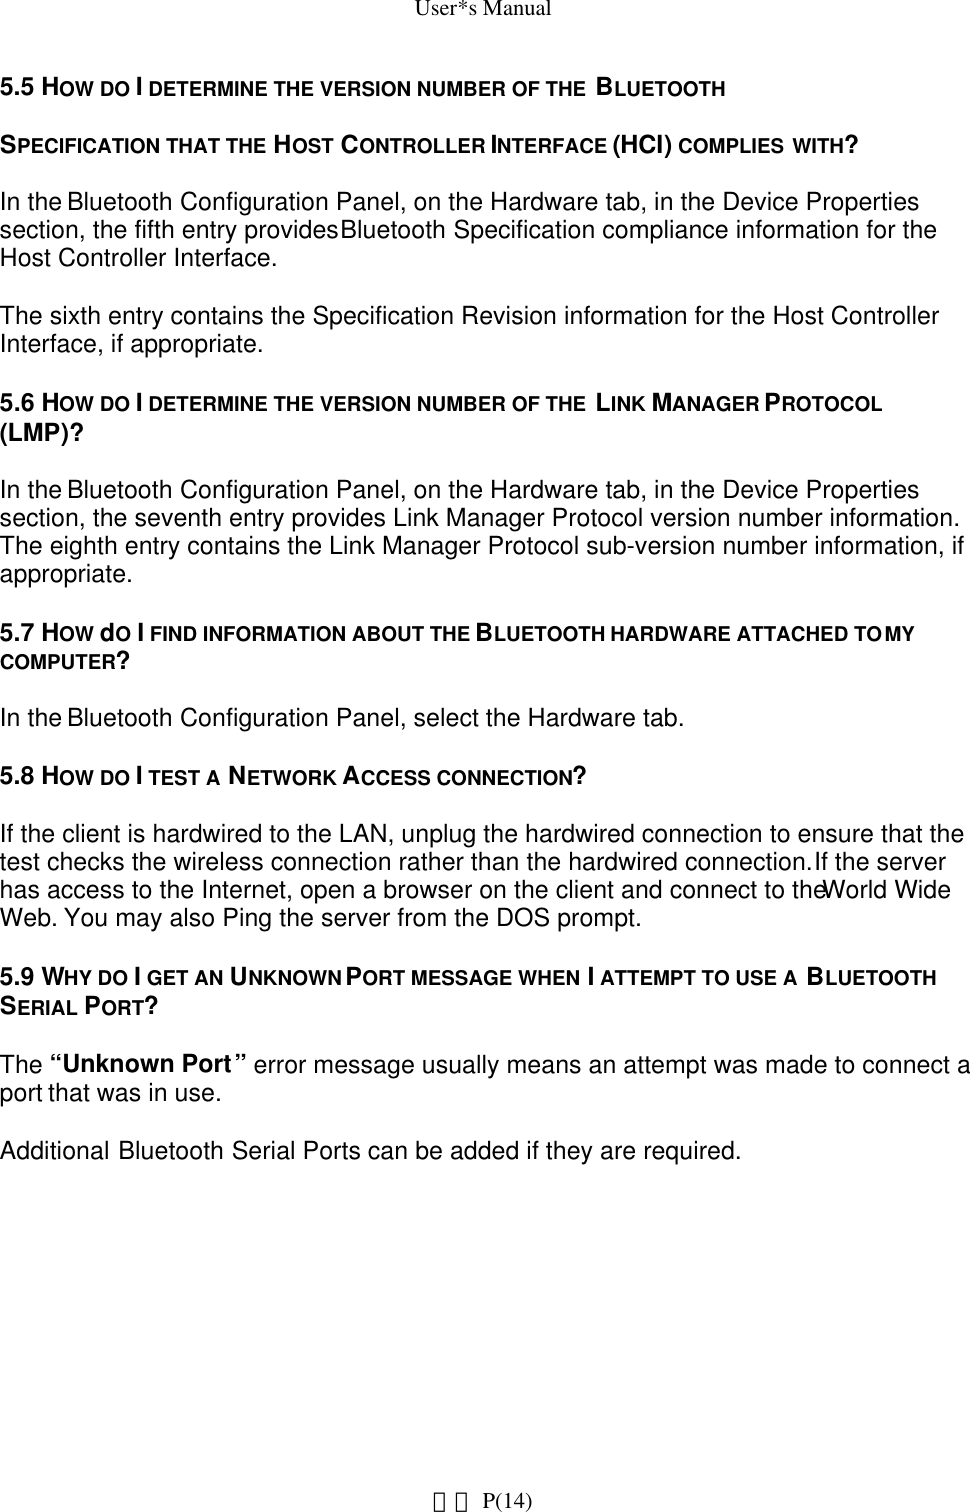 User*s Manual5.5 HOW DO I DETERMINE THE VERSION NUMBER OF THE  BLUETOOTHSPECIFICATION THAT THE HOST CONTROLLER INTERFACE (HCI) COMPLIES WITH?In the Bluetooth Configuration Panel, on the Hardware tab, in the Device Properties section, the fifth entry provides Bluetooth Specification compliance information for the Host Controller Interface.The sixth entry contains the Specification Revision information for the Host Controller Interface, if appropriate.5.6 HOW DO I DETERMINE THE VERSION NUMBER OF THE  LINK MANAGER PROTOCOL (LMP)?In the Bluetooth Configuration Panel, on the Hardware tab, in the Device Properties section, the seventh entry provides Link Manager Protocol version number information. The eighth entry contains the Link Manager Protocol sub-version number information, if appropriate.5.7 HOW dO I FIND INFORMATION ABOUT THE BLUETOOTH HARDWARE ATTACHED TO MY COMPUTER?In the Bluetooth Configuration Panel, select the Hardware tab.5.8 HOW DO I TEST A NETWORK ACCESS CONNECTION?If the client is hardwired to the LAN, unplug the hardwired connection to ensure that the test checks the wireless connection rather than the hardwired connection. If the server has access to the Internet, open a browser on the client and connect to the World Wide Web. You may also Ping the server from the DOS prompt.5.9 WHY DO I GET AN UNKNOWN PORT MESSAGE WHEN I ATTEMPT TO USE A BLUETOOTH SERIAL PORT?The “Unknown Port” error message usually means an attempt was made to connect a port that was in use.Additional Bluetooth Serial Ports can be added if they are required. P(14)網頁